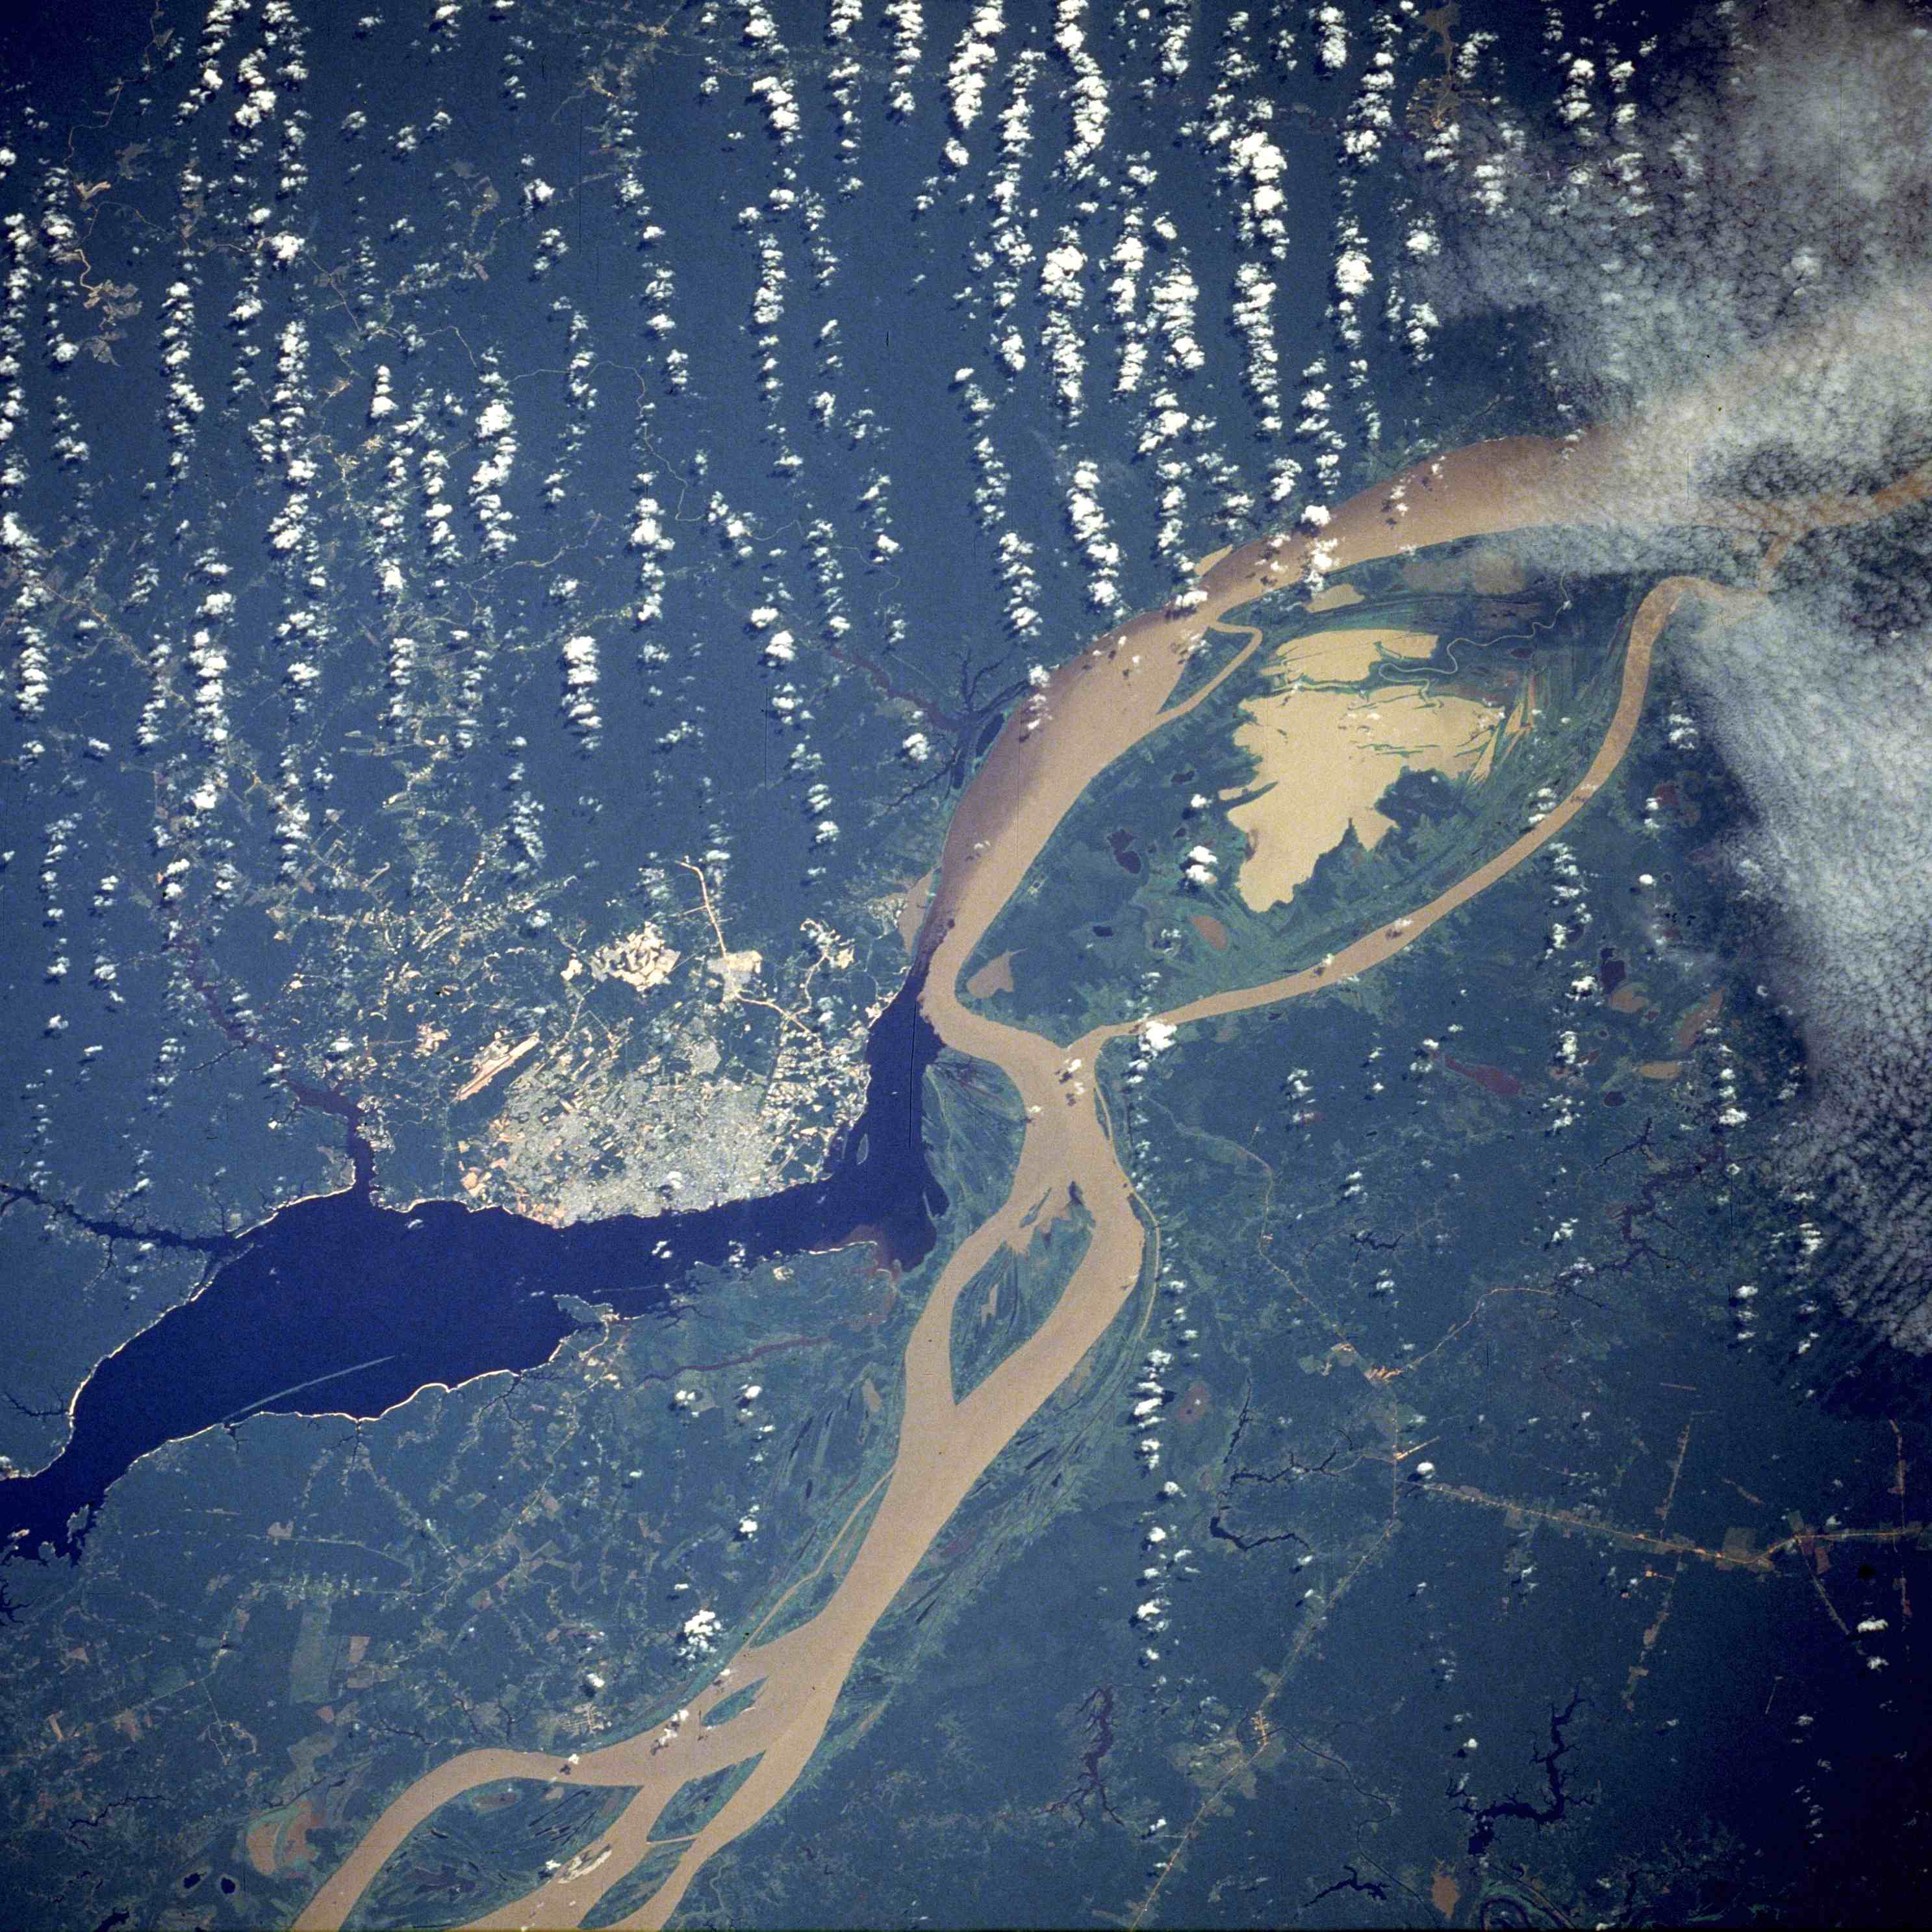 Manaus, the largest city in Amazonas, as seen from a NASA satellite image, surrounded by the dark Rio Negro and the muddy Amazon River.